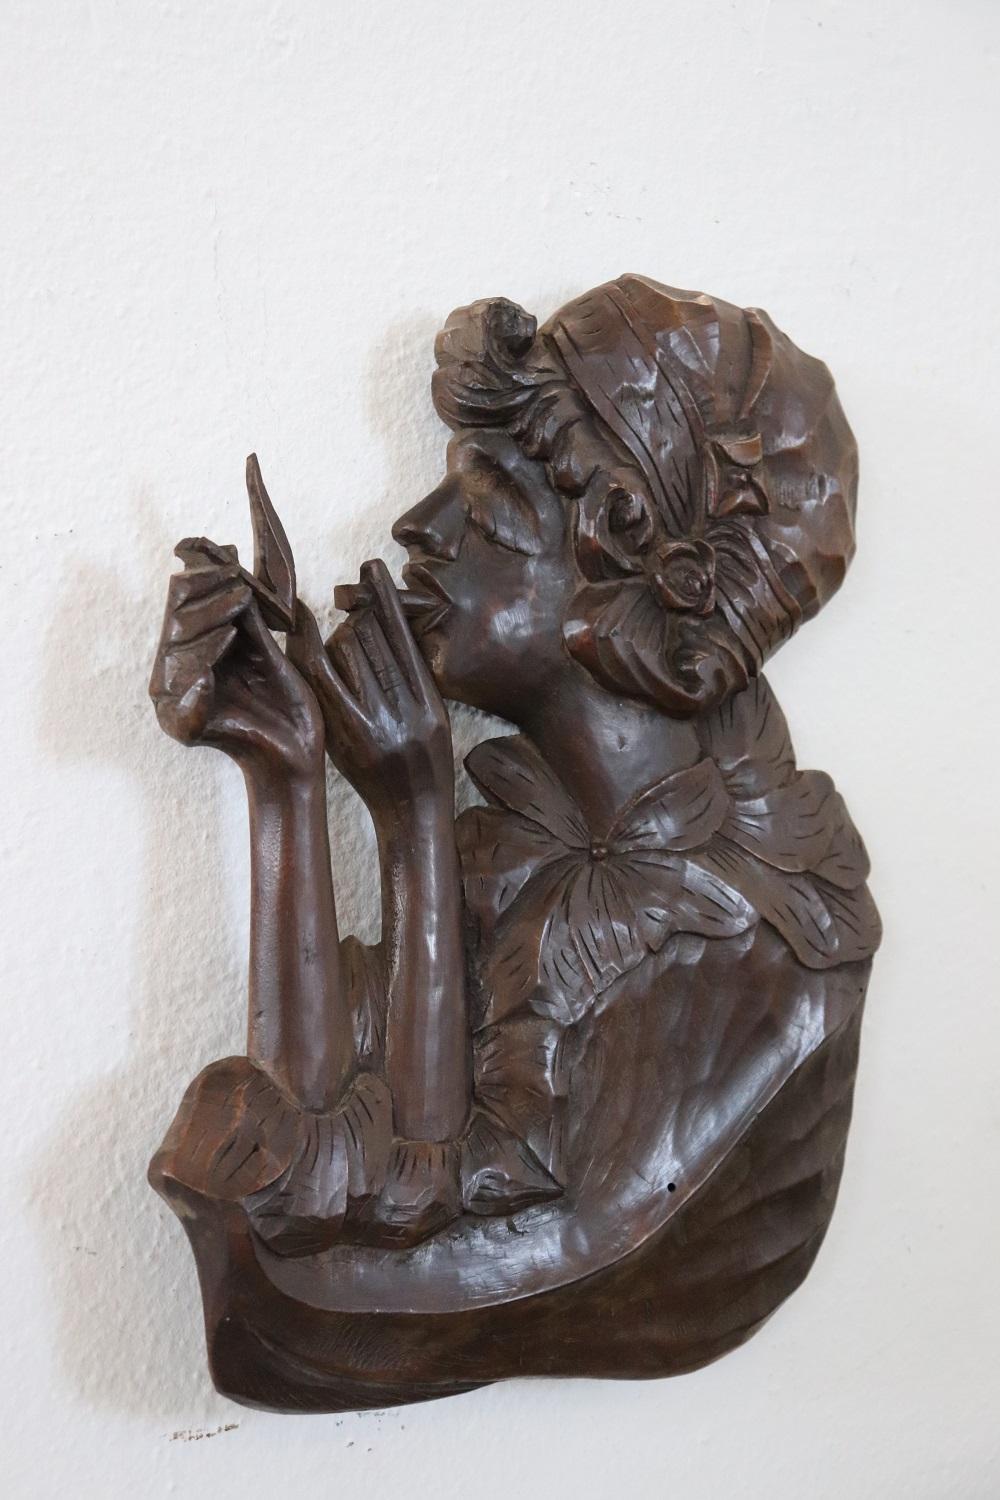 Refined low relief sculpture from the Art Nouveau period in walnut wood. A woman elegantly dressed in the fashion of the Art Nouveau era lighting a cigarette.
 